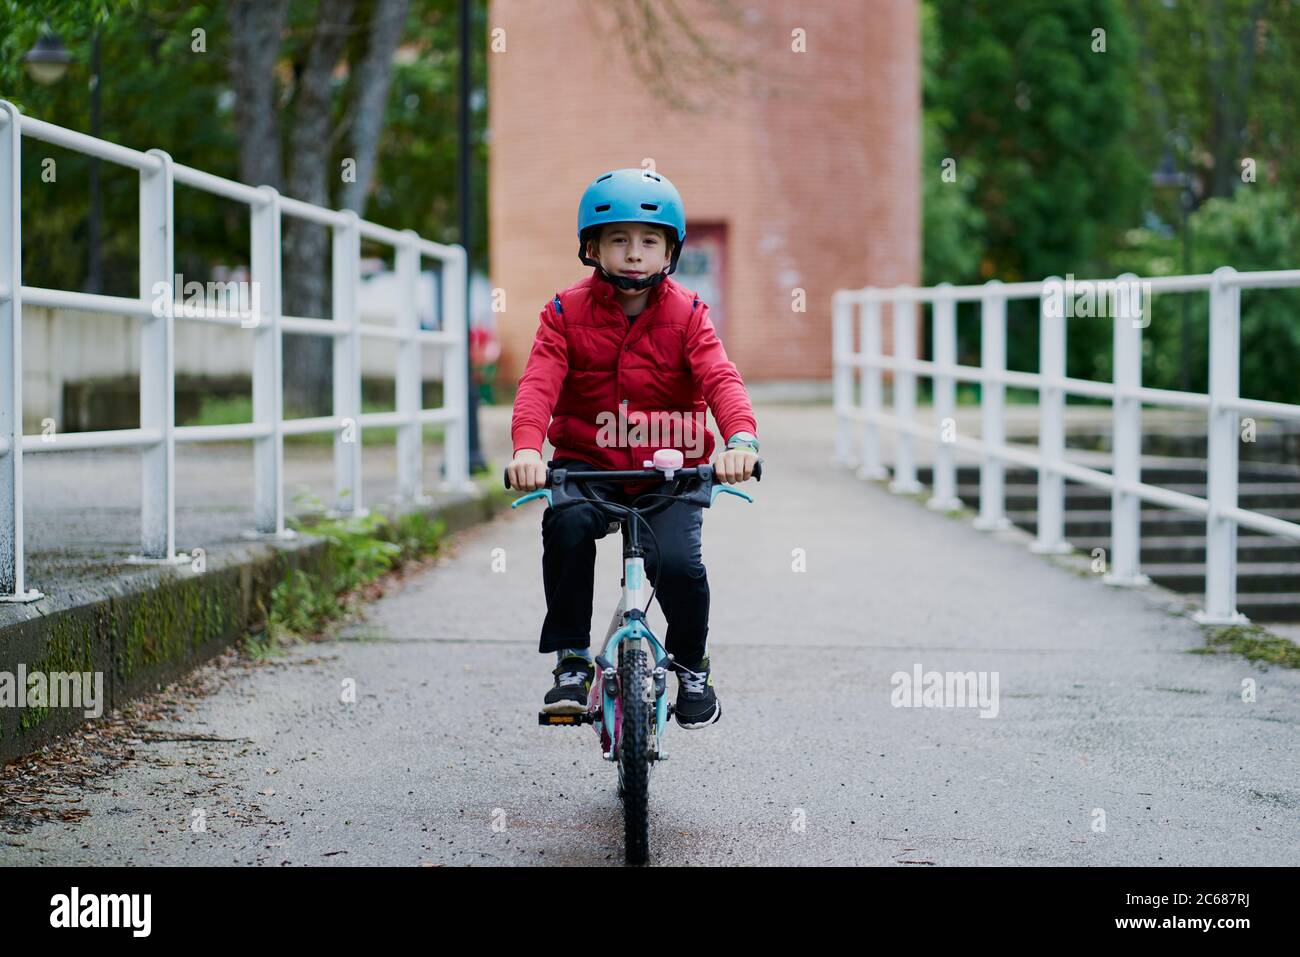 boy riding a bike with a blue helmet and a red overcoat Stock Photo